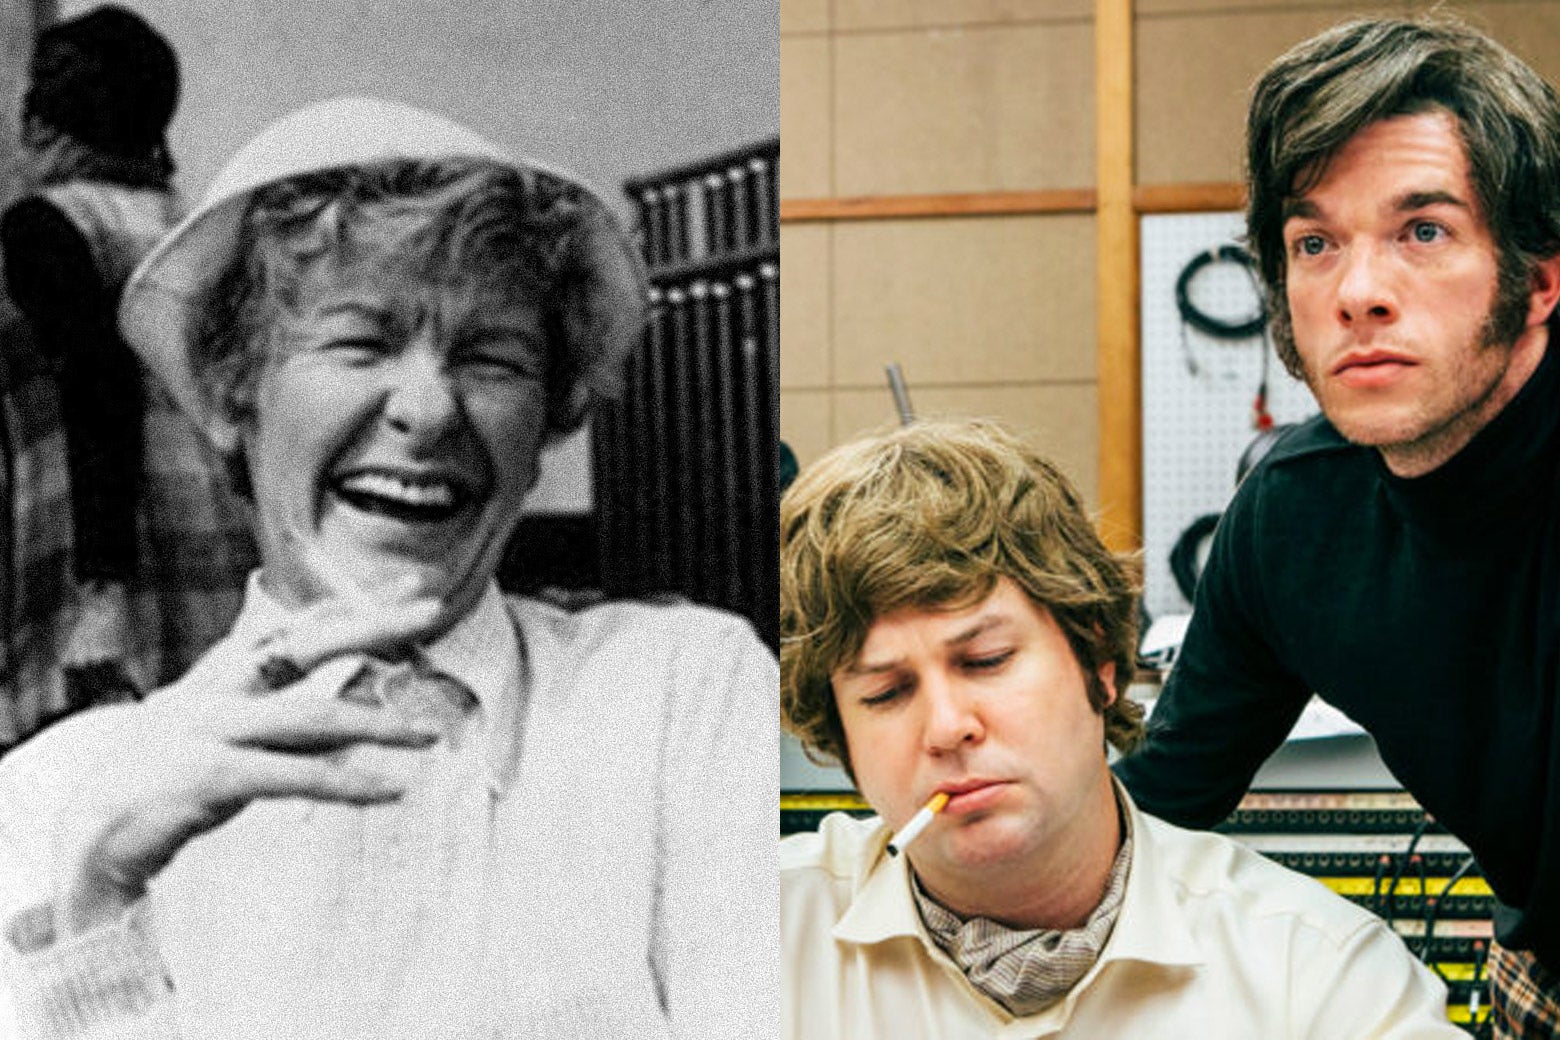 Elaine Stritch in Original Cast Album: Company (left), Beck Bennett and John Mulaney in Documentary Now's "Co-Op" (right).